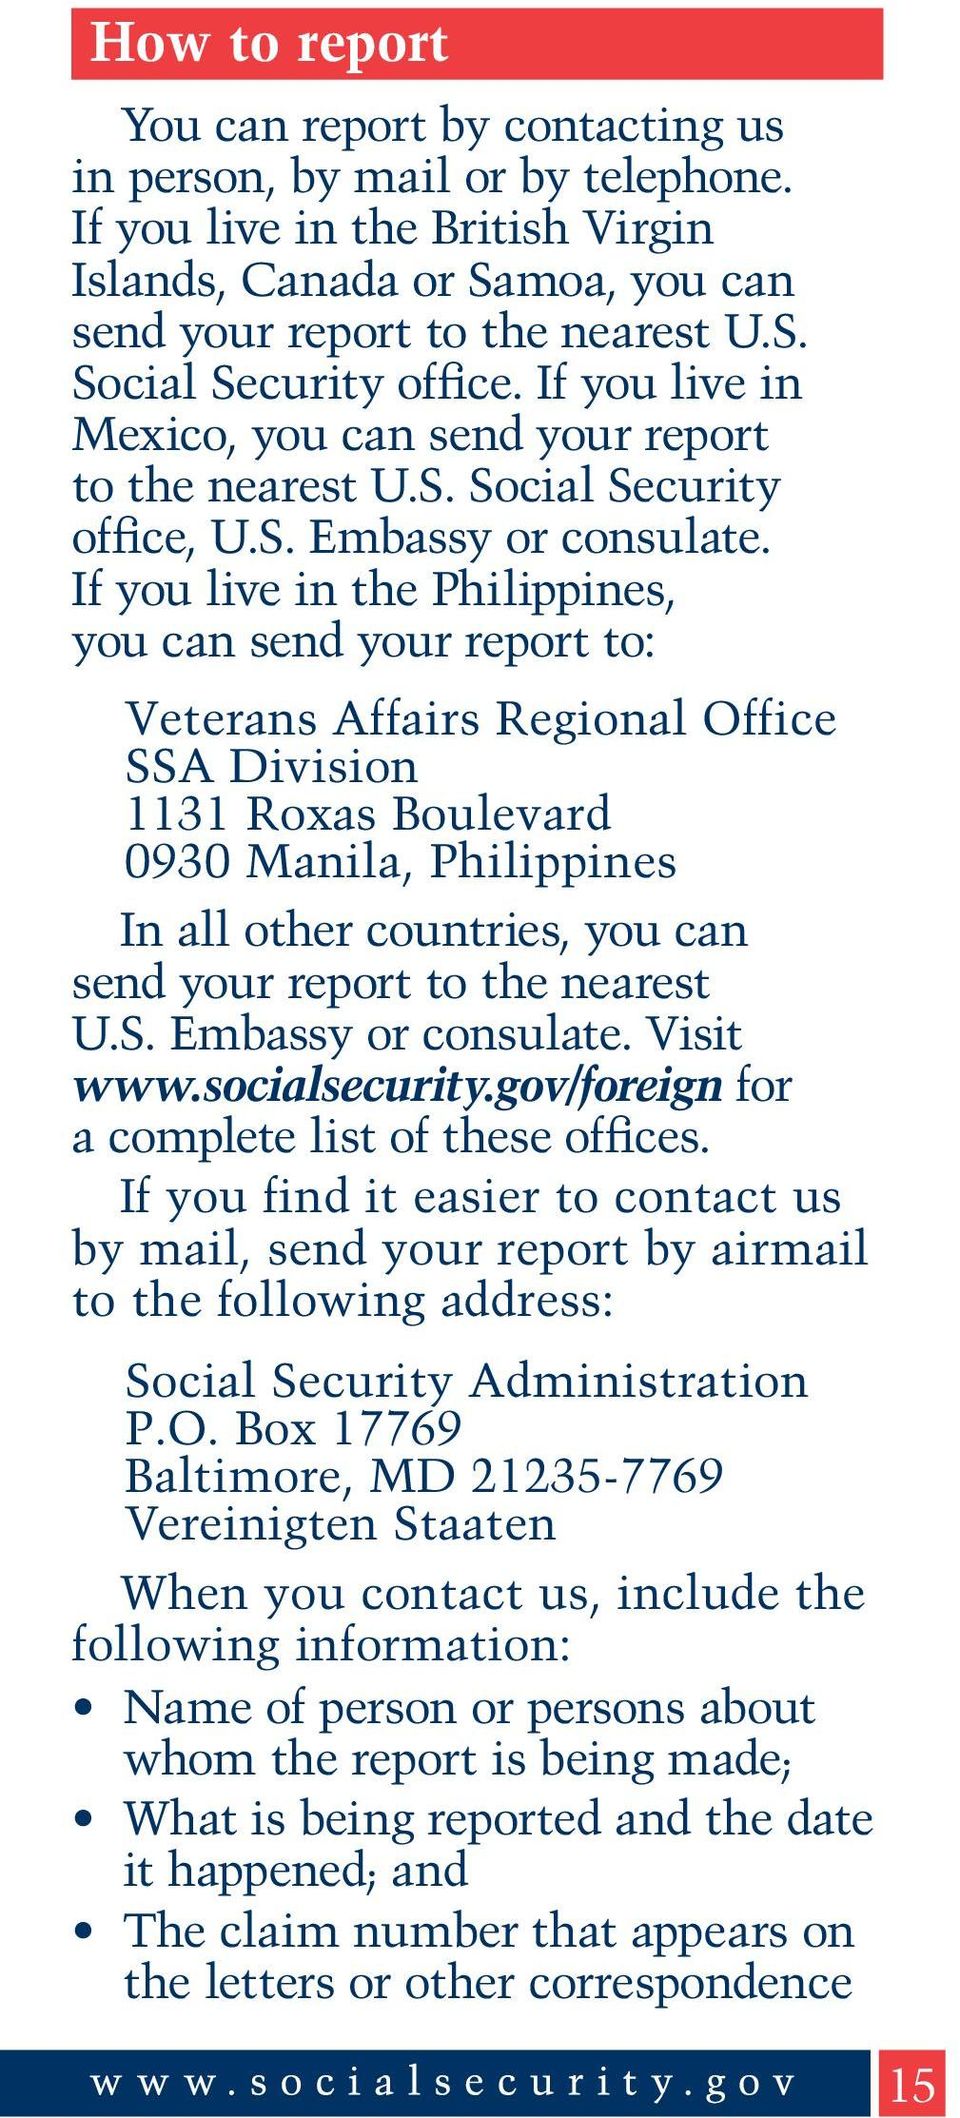 If you live in the Philippines, you can send your report to: Veterans Affairs Regional Office SSA Division 1131 Roxas Boulevard 0930 Manila, Philippines In all other countries, you can send your